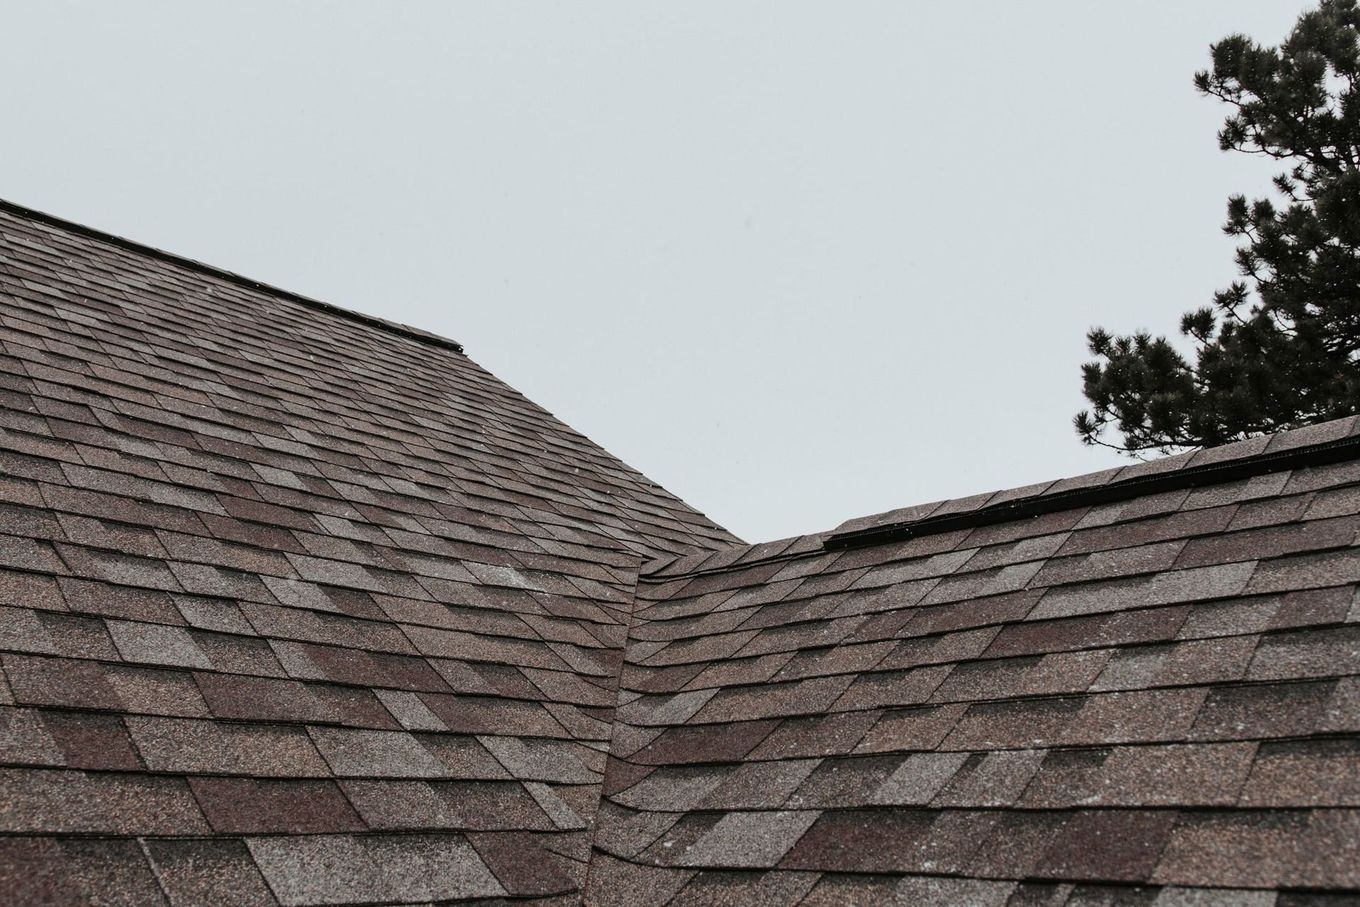 A close up of a roof with a tree in the background.